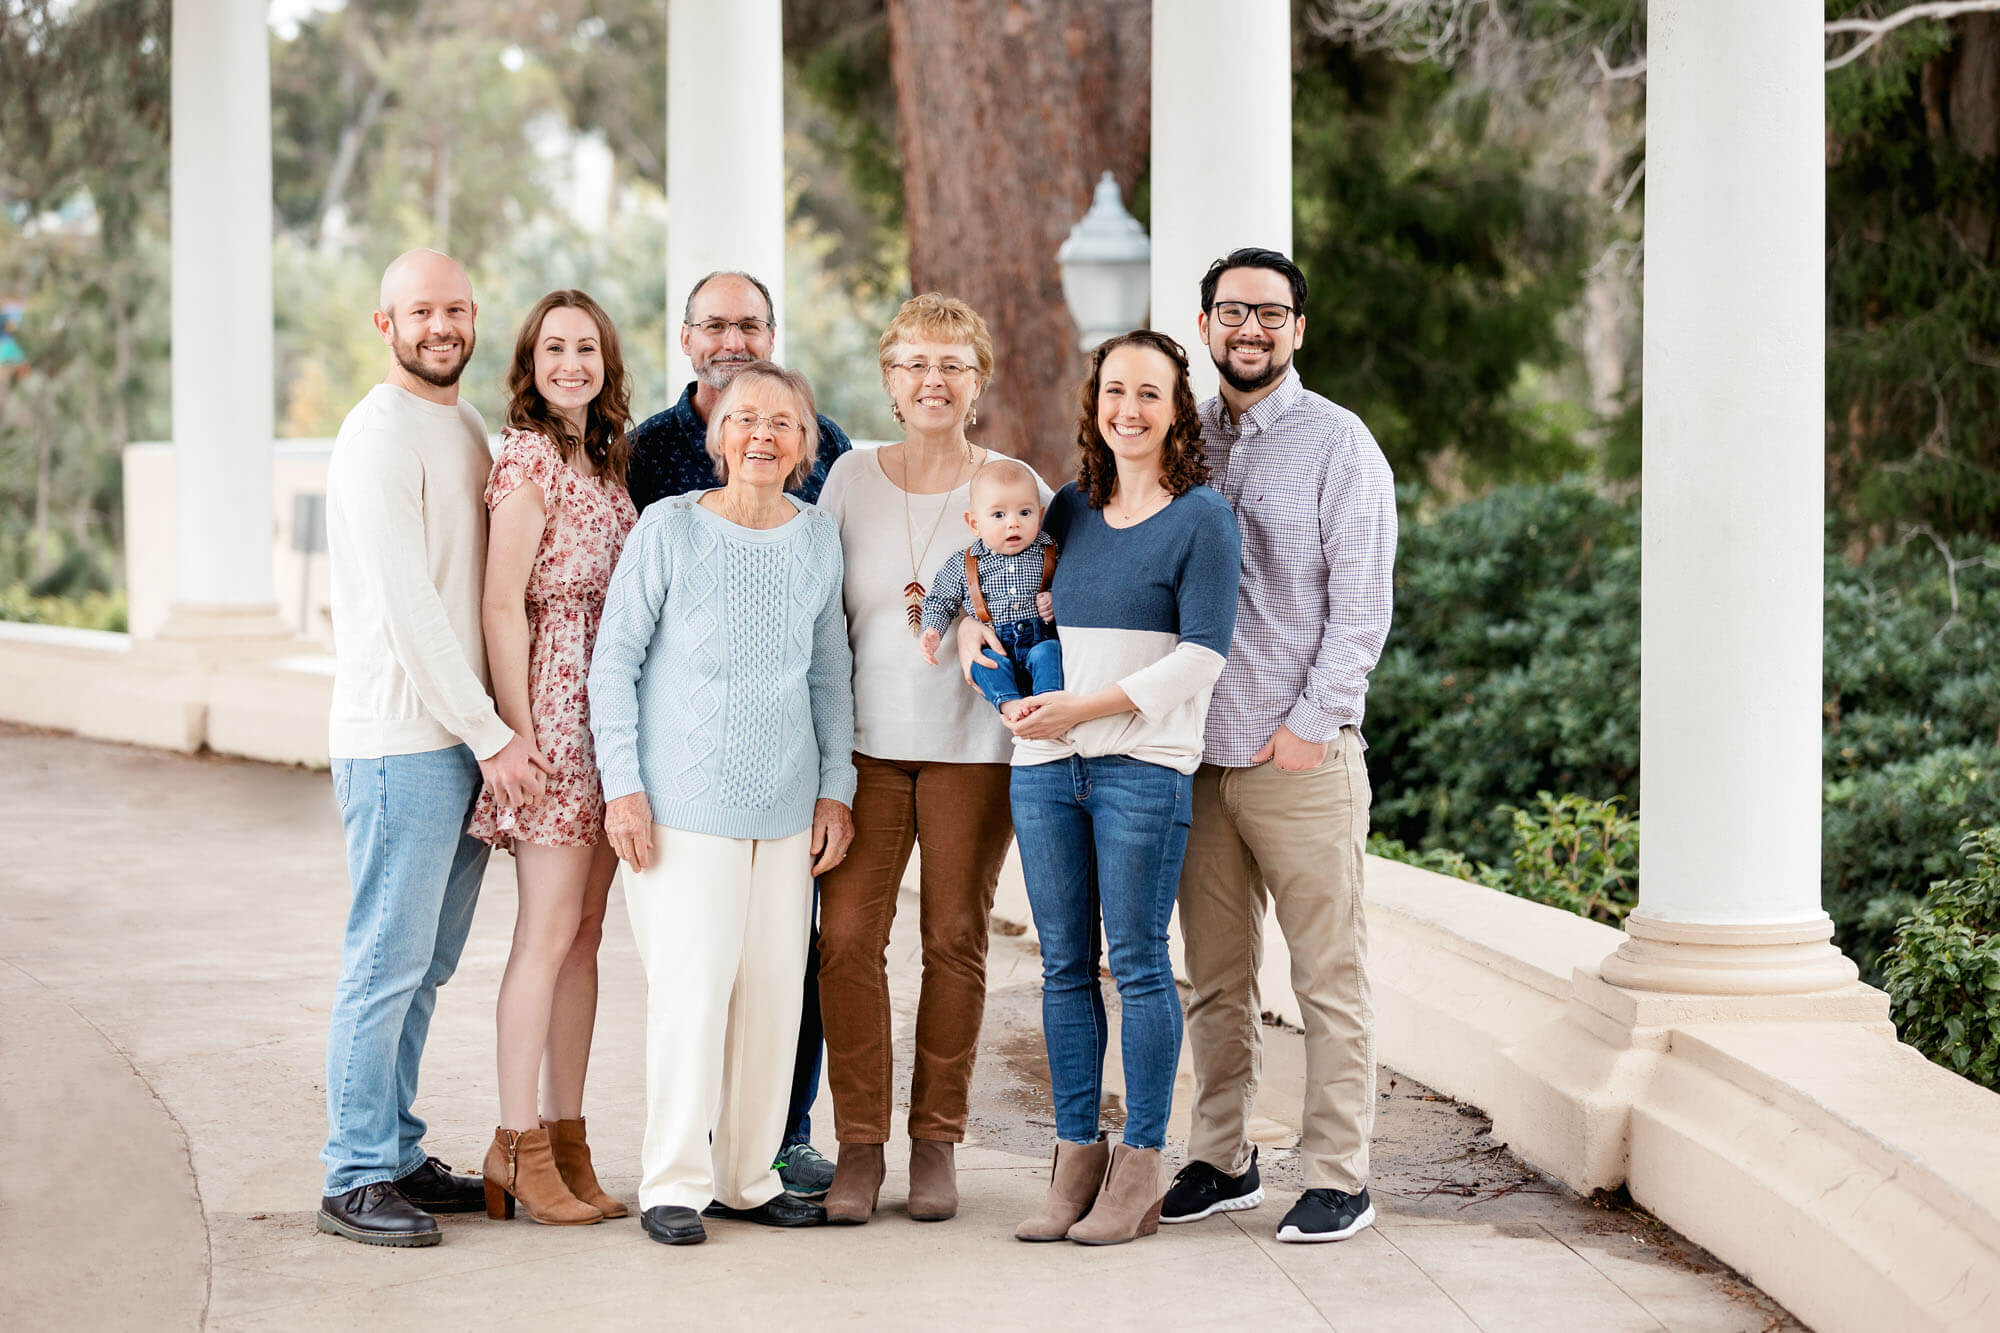 The Oragan Pavilion in Balboa Park is a beautiful spot and one of the Best Locations for San Diego Family Photos